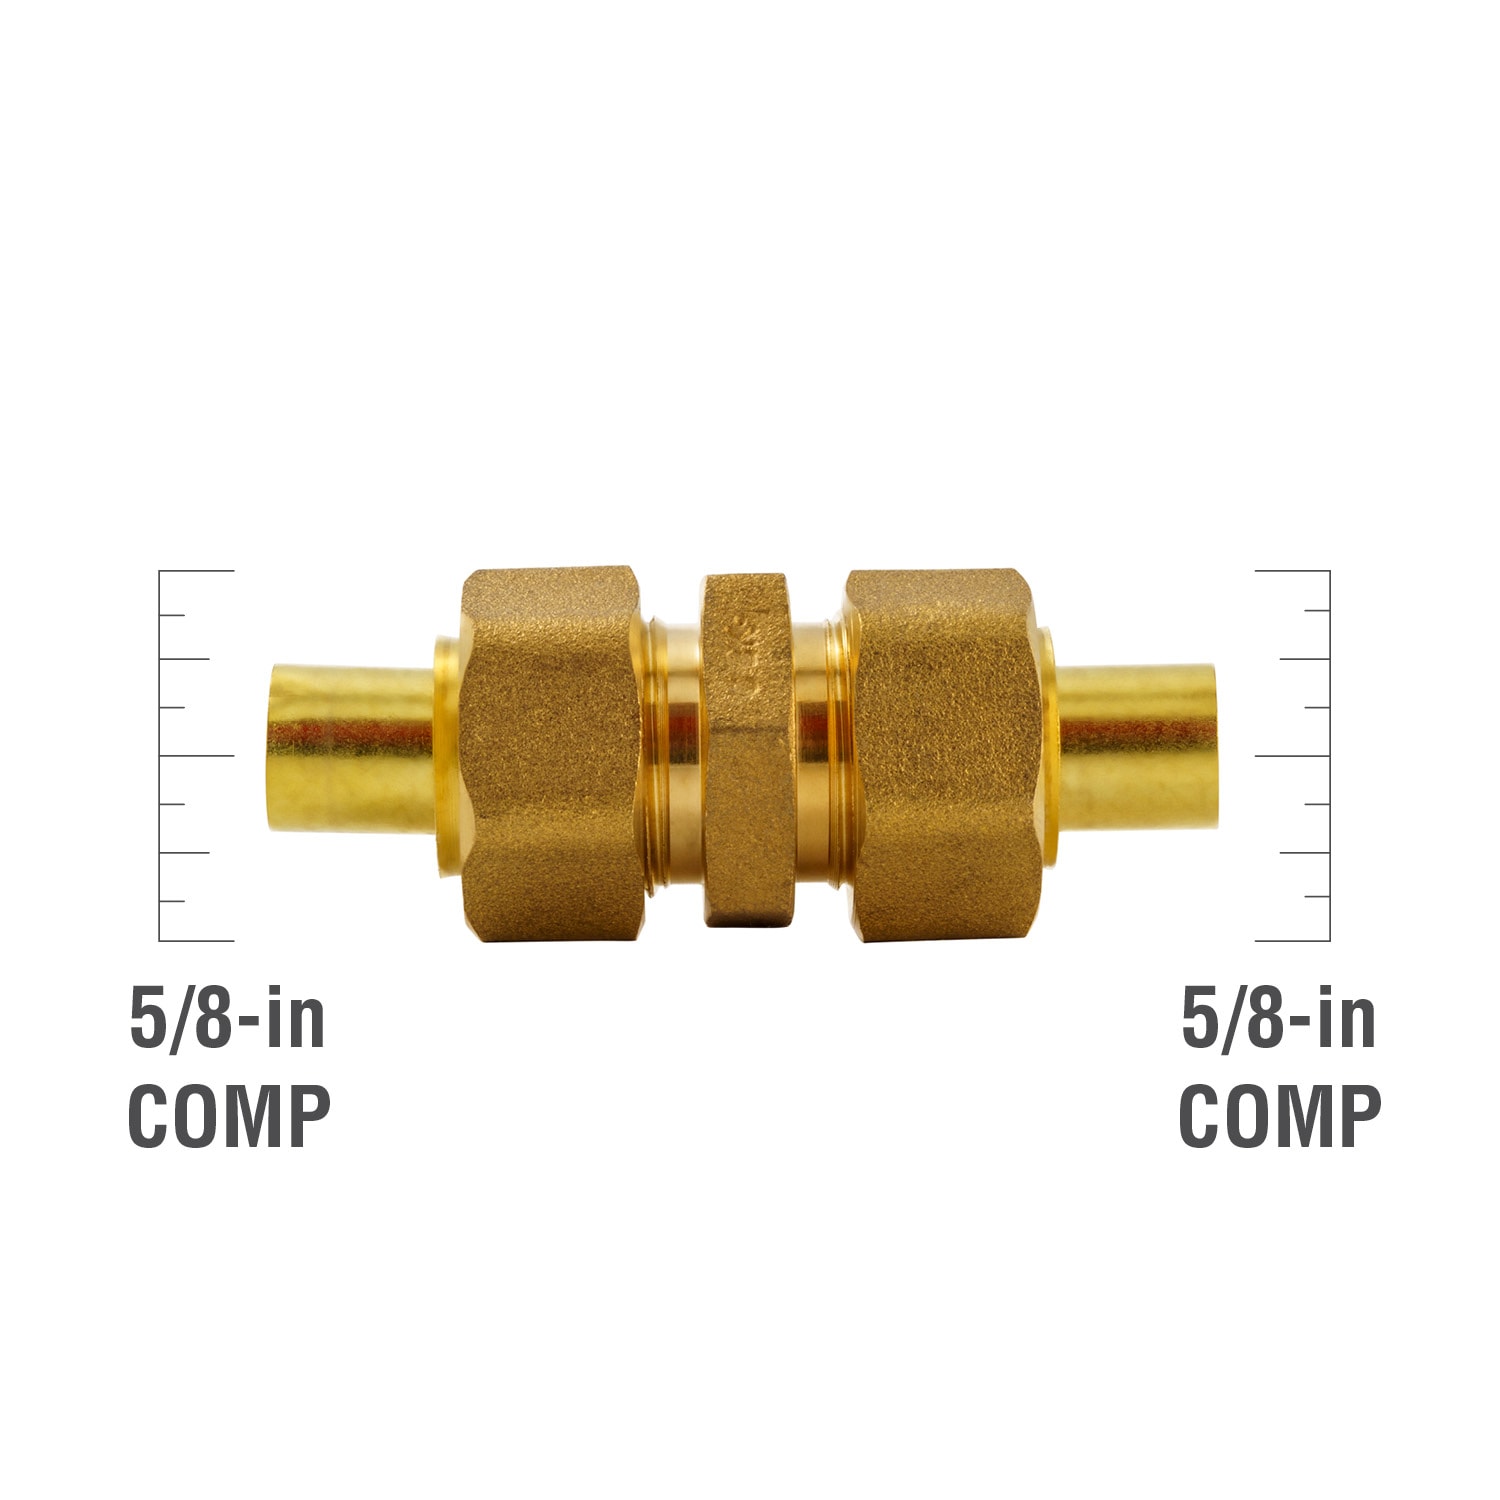 LTWFITTING 3/16 in. O.D. Brass Compression Coupling Fitting (10-Pack)  HF62310 - The Home Depot